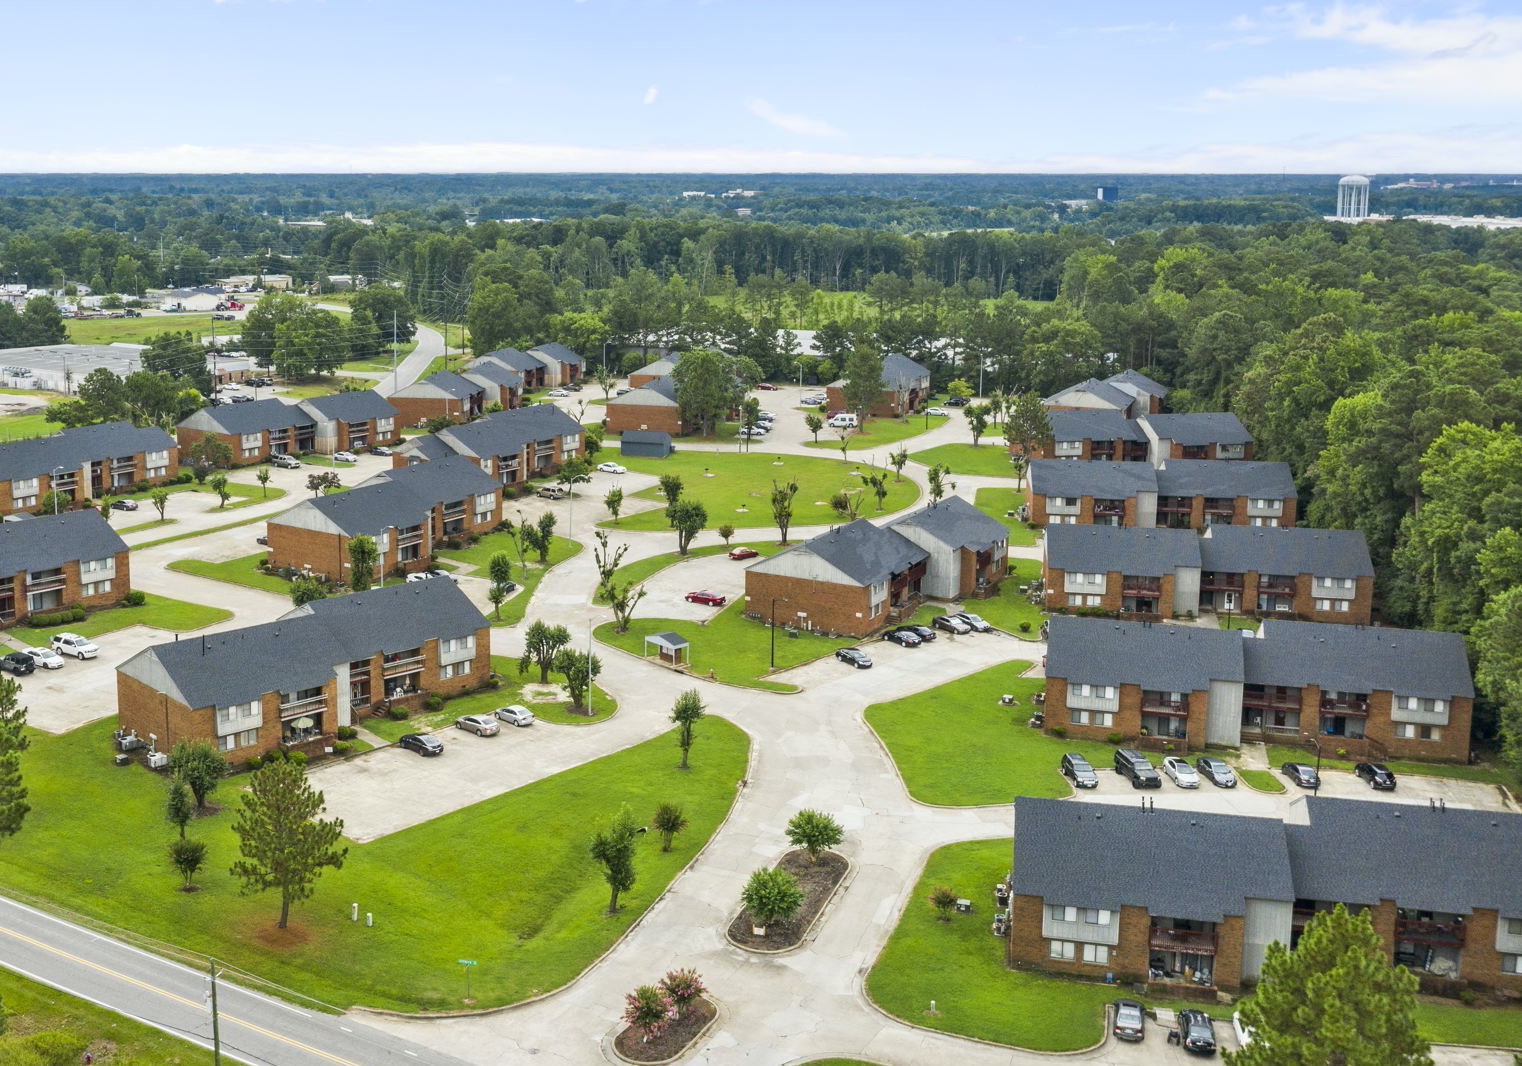 Brazos Residential Continues Expansion with Acquisition of Two Multifamily Communities Totaling 425-Units in North Carolina Markets